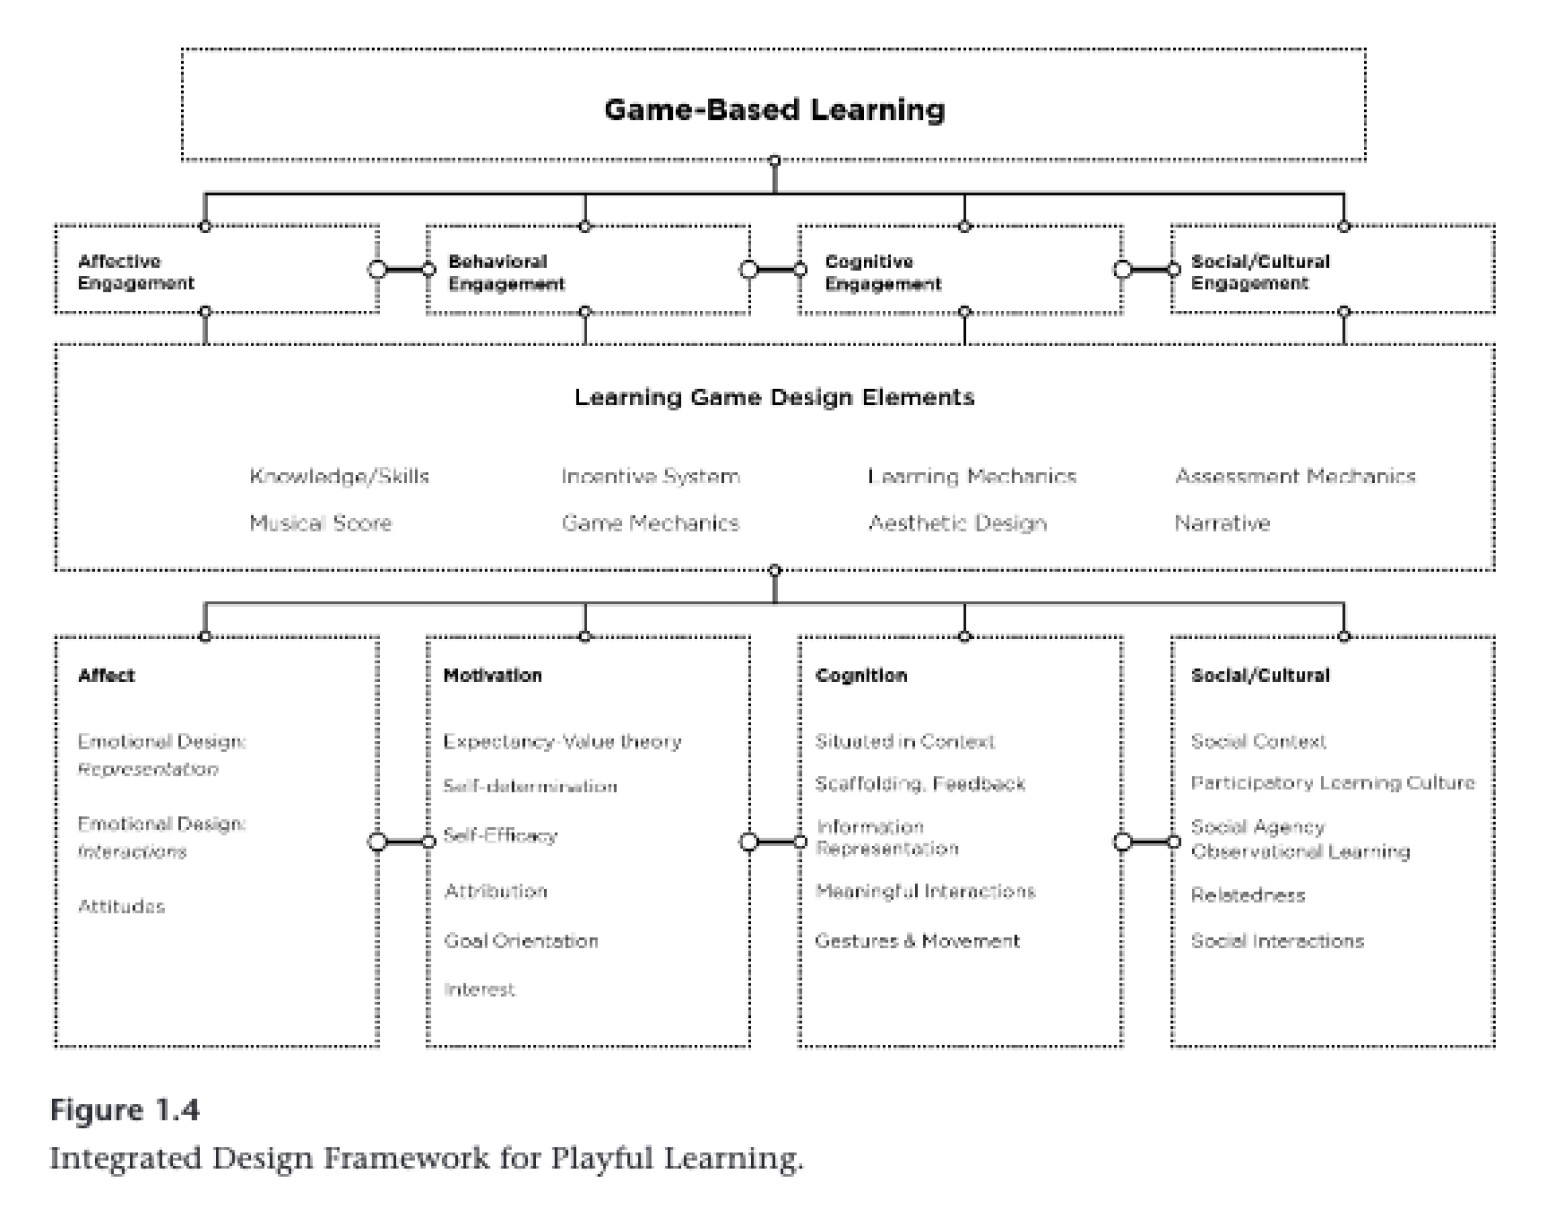 Plass et al 2020 Theoretical Foundations of Game-Based and Playful Learning